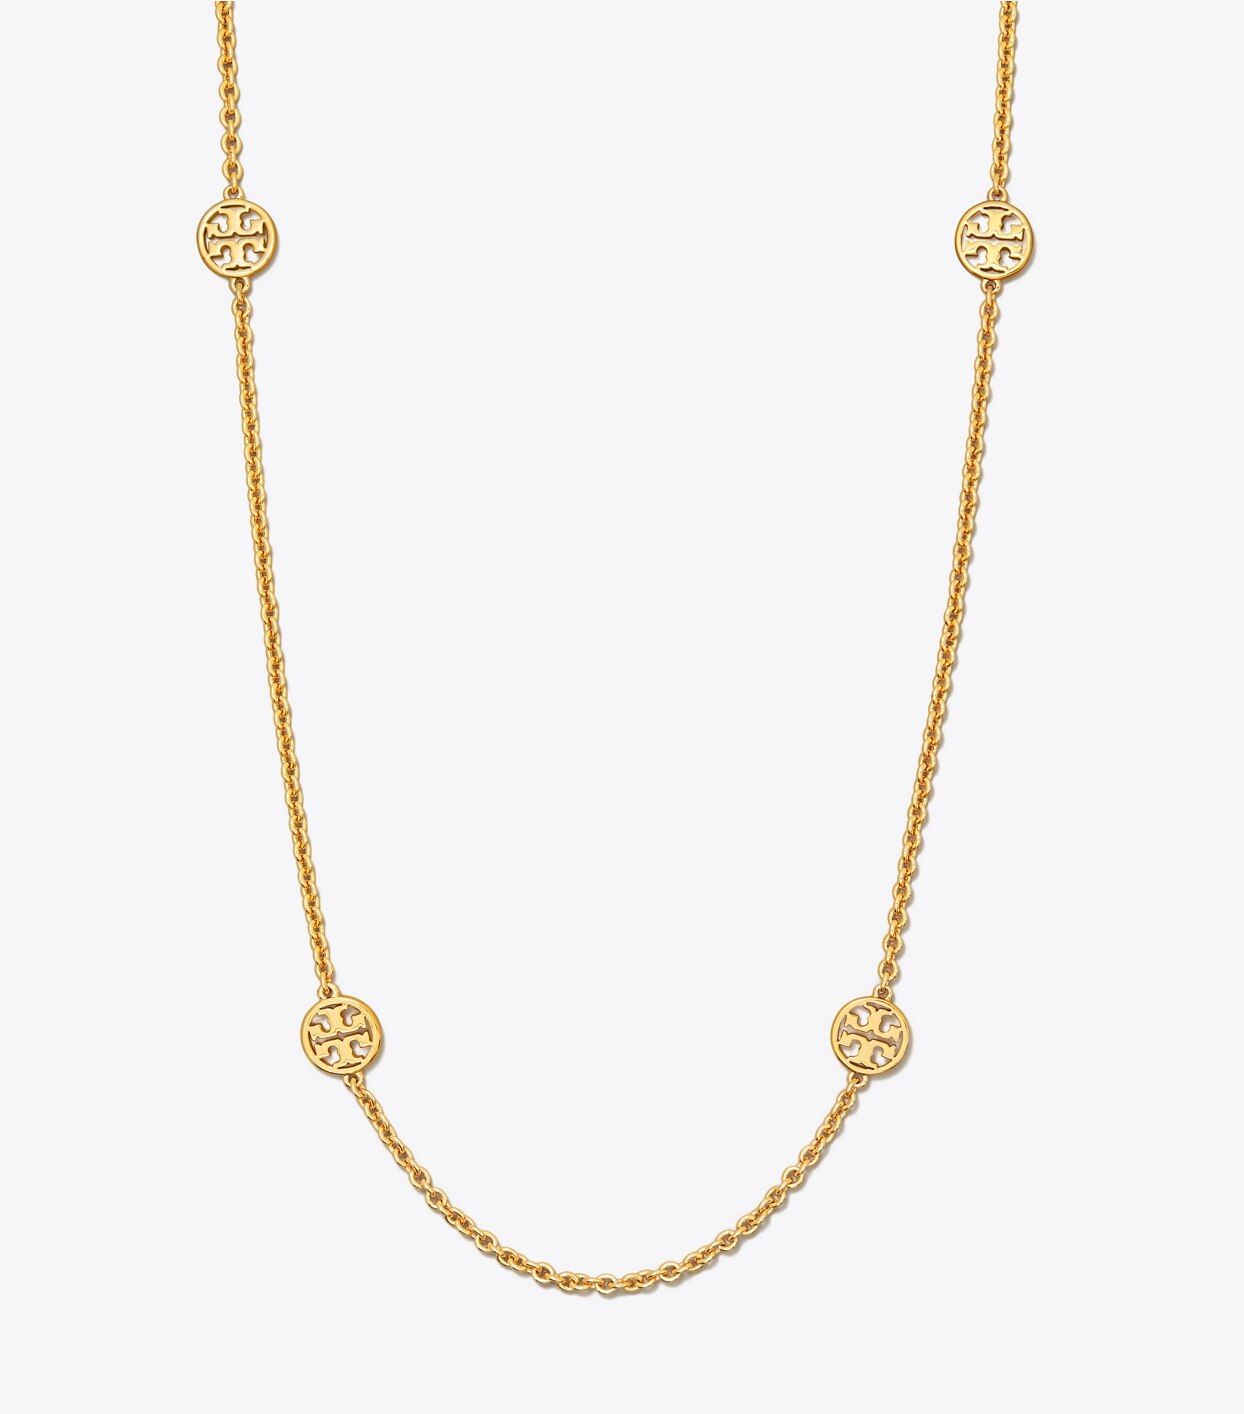 Tory Burch Delicate Logo Necklace: Women's Accessories | Tory Burch (US)